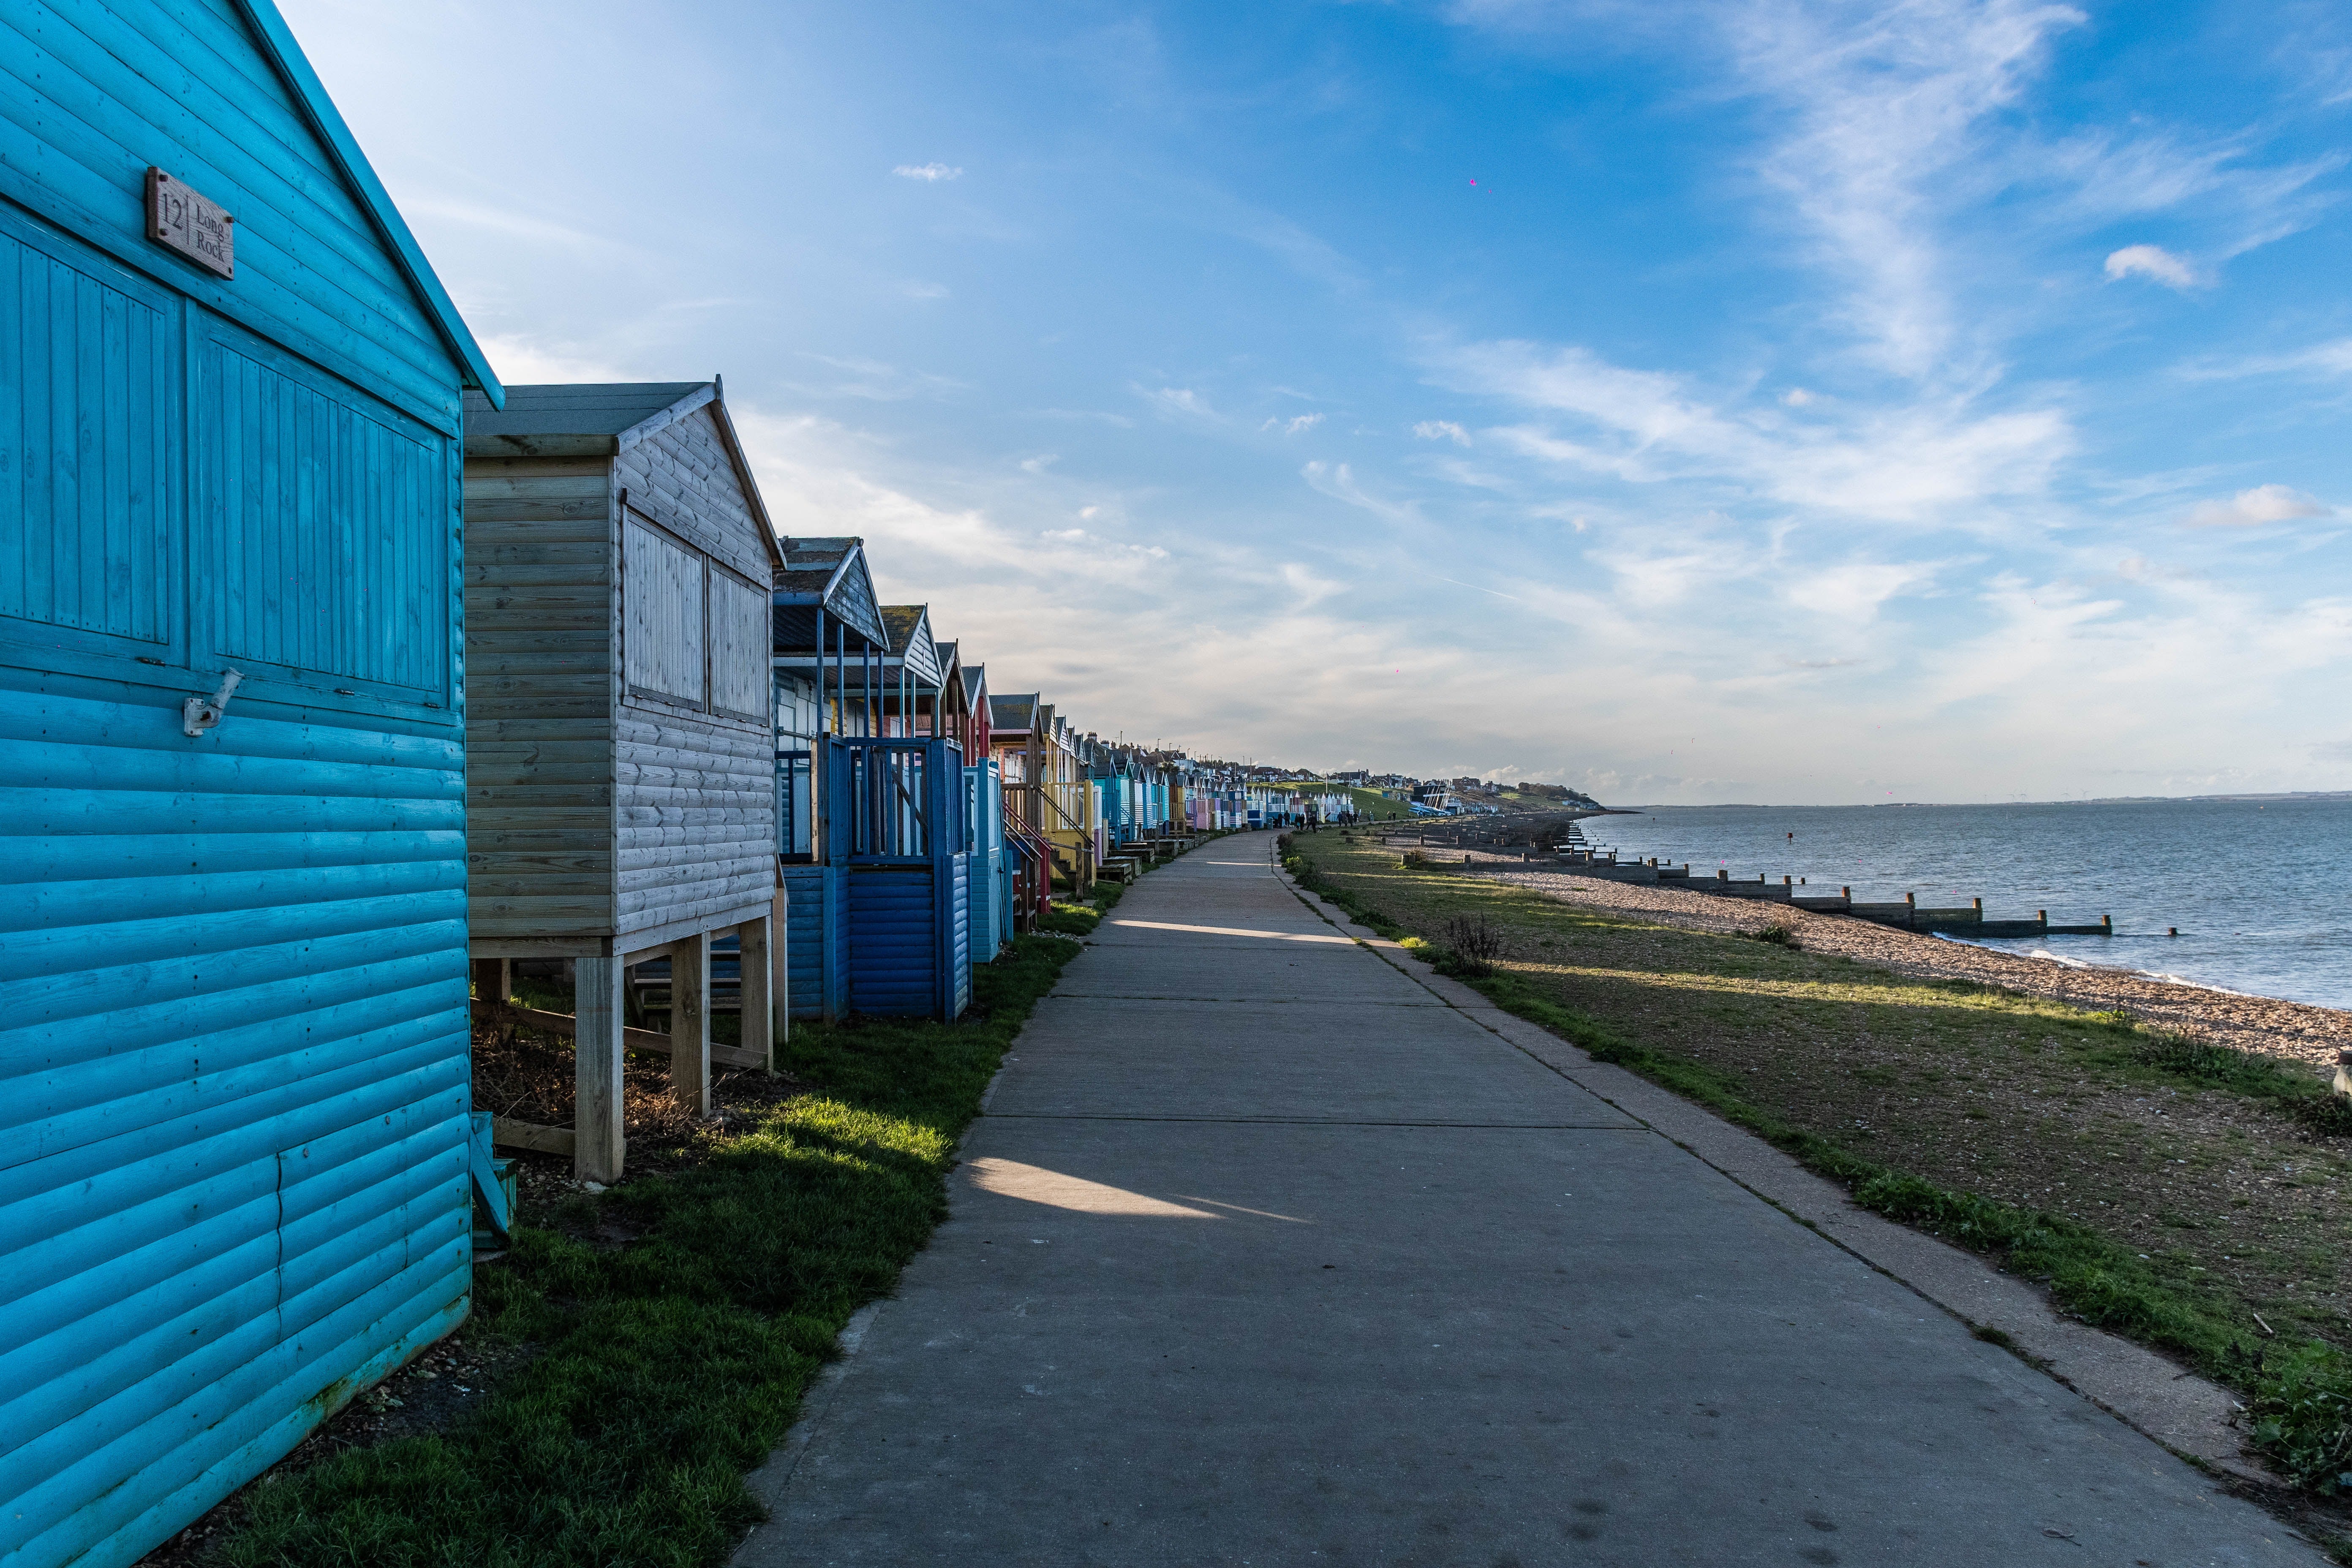 The county of Kent is bursting with coastal cool and seaside charm